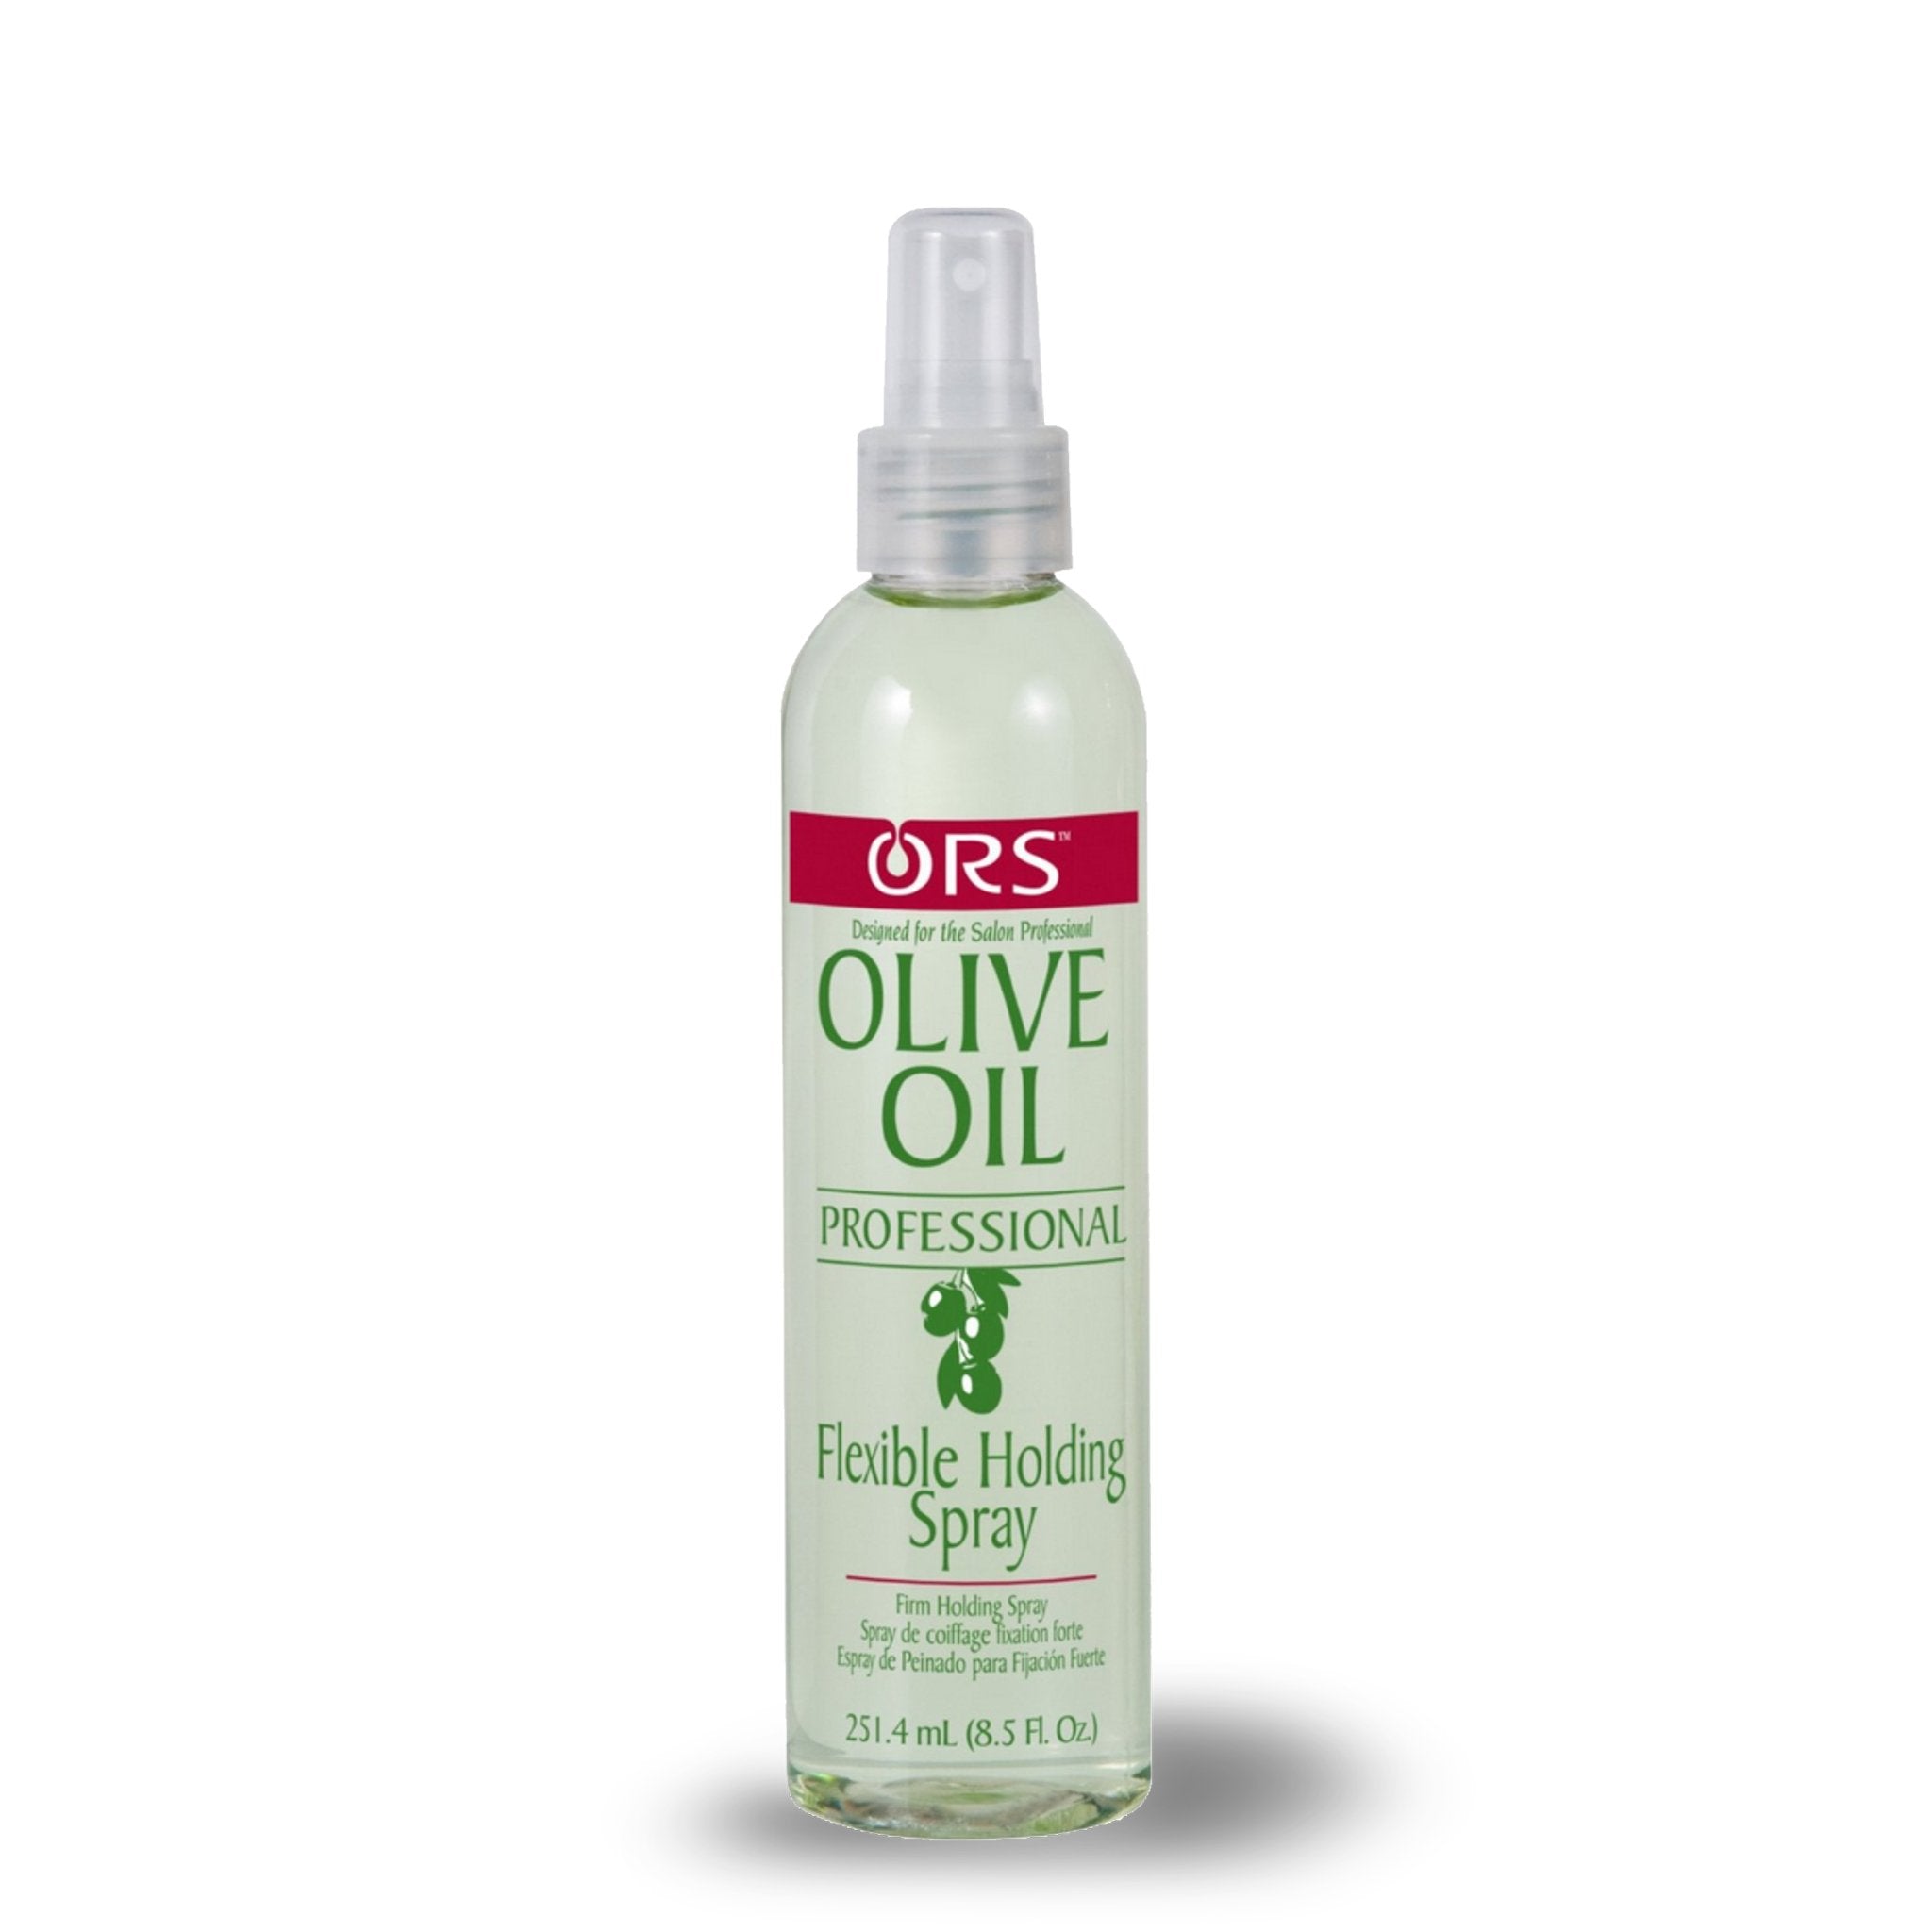 Pro Flexible Holding Spray (8 oz)  Olive Oil Professional – ORS